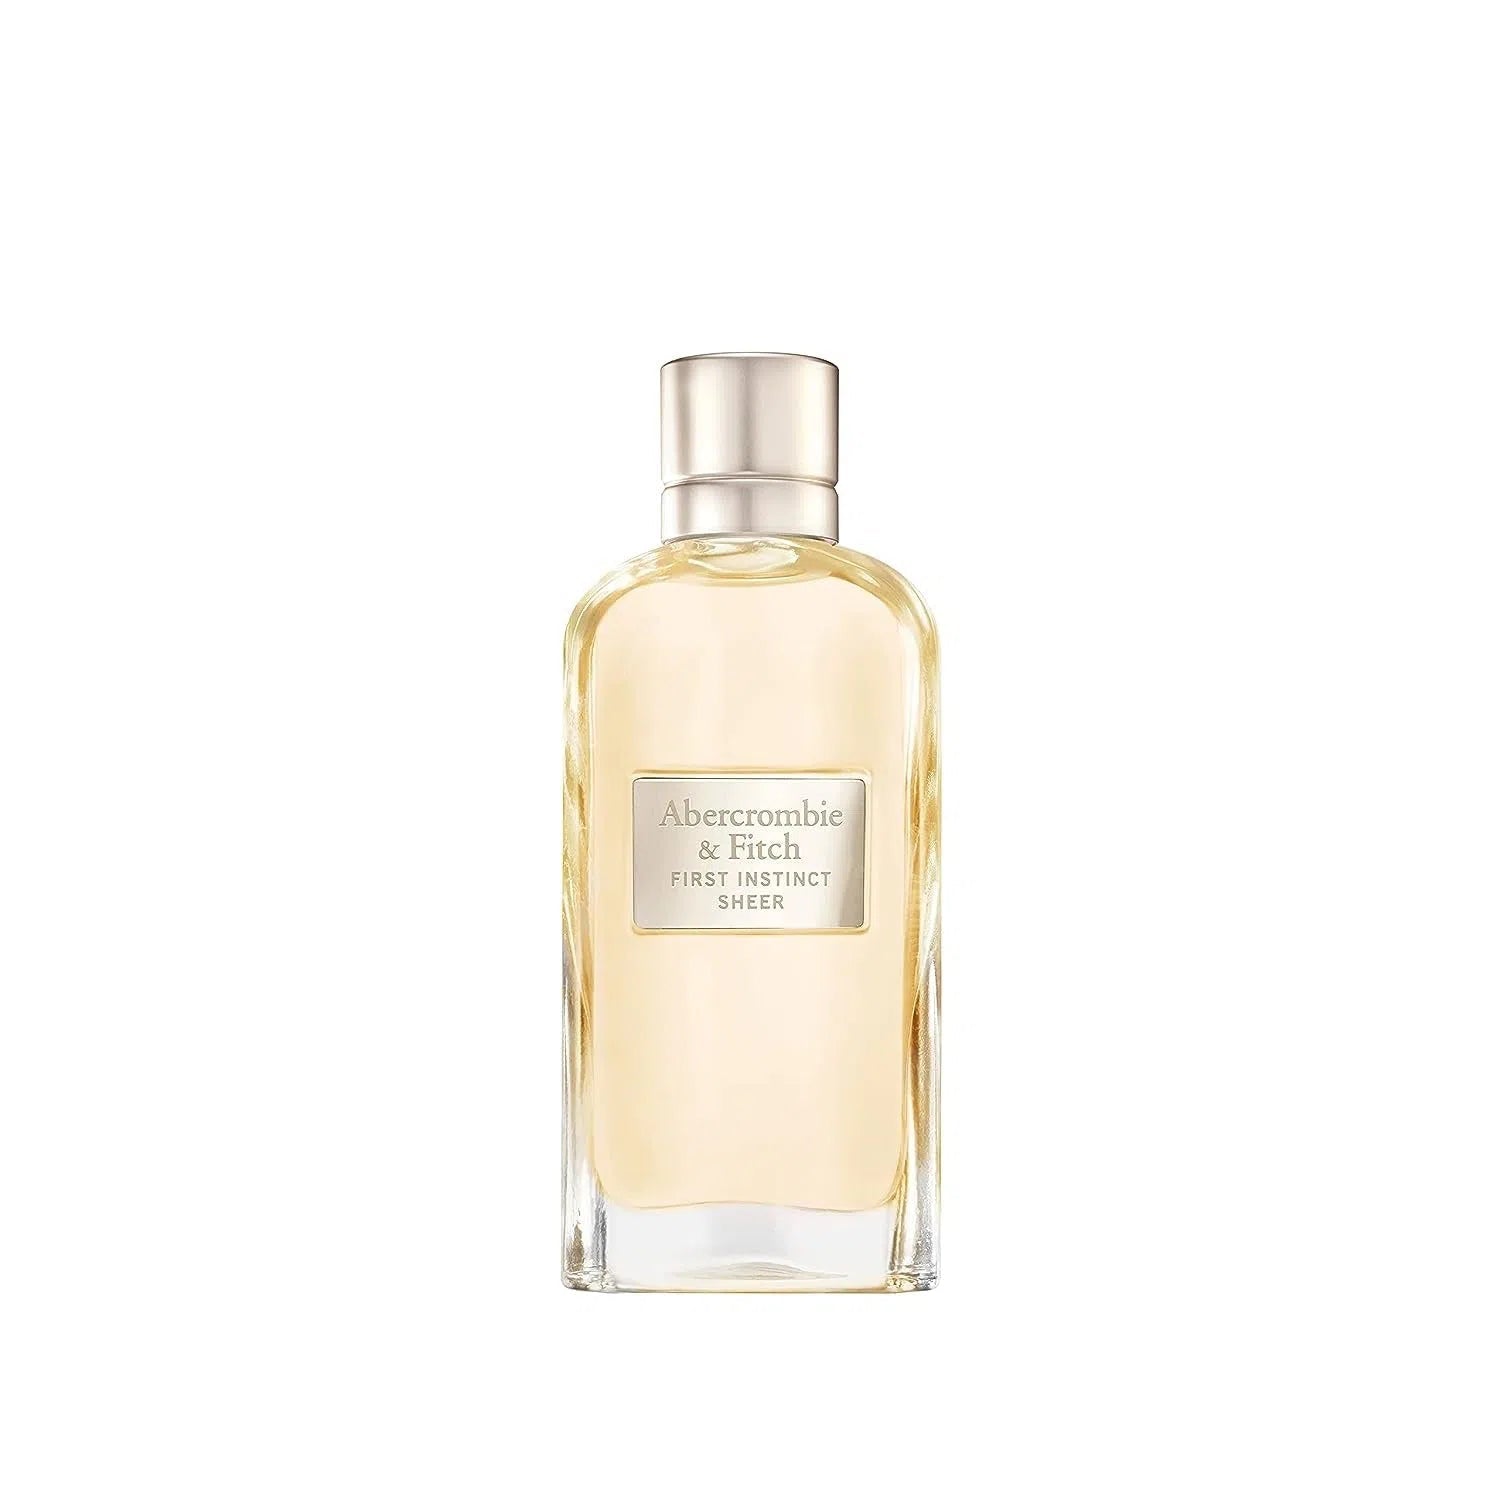 Abercrombie & Fitch First Instinct Sheer for Woman 100ml